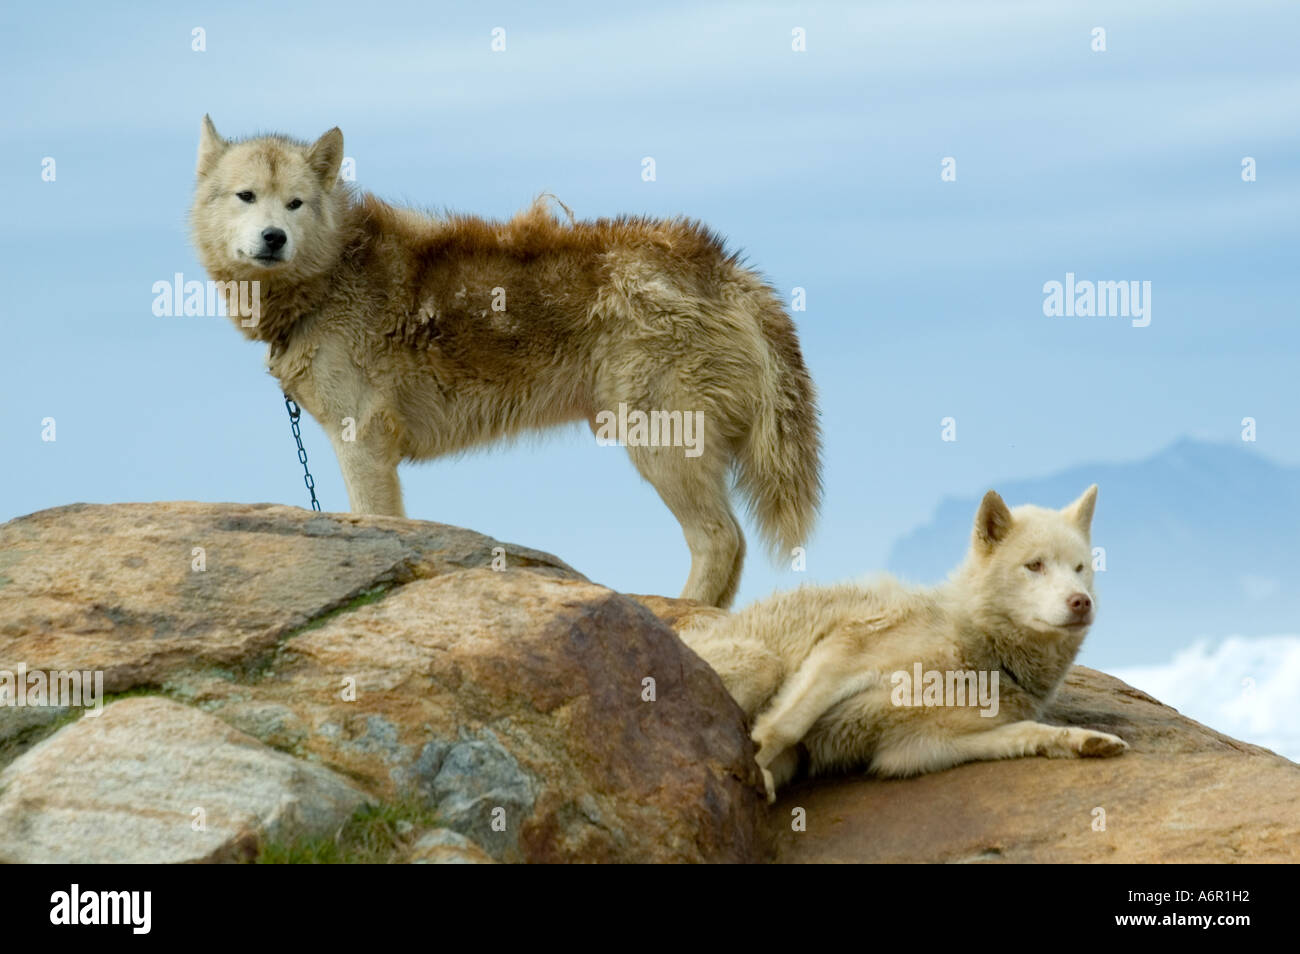 Greenland Dogs or Husky, at the Inuit village of Tiniteqilâq, Sermilik Fjord, East Greenland Stock Photo